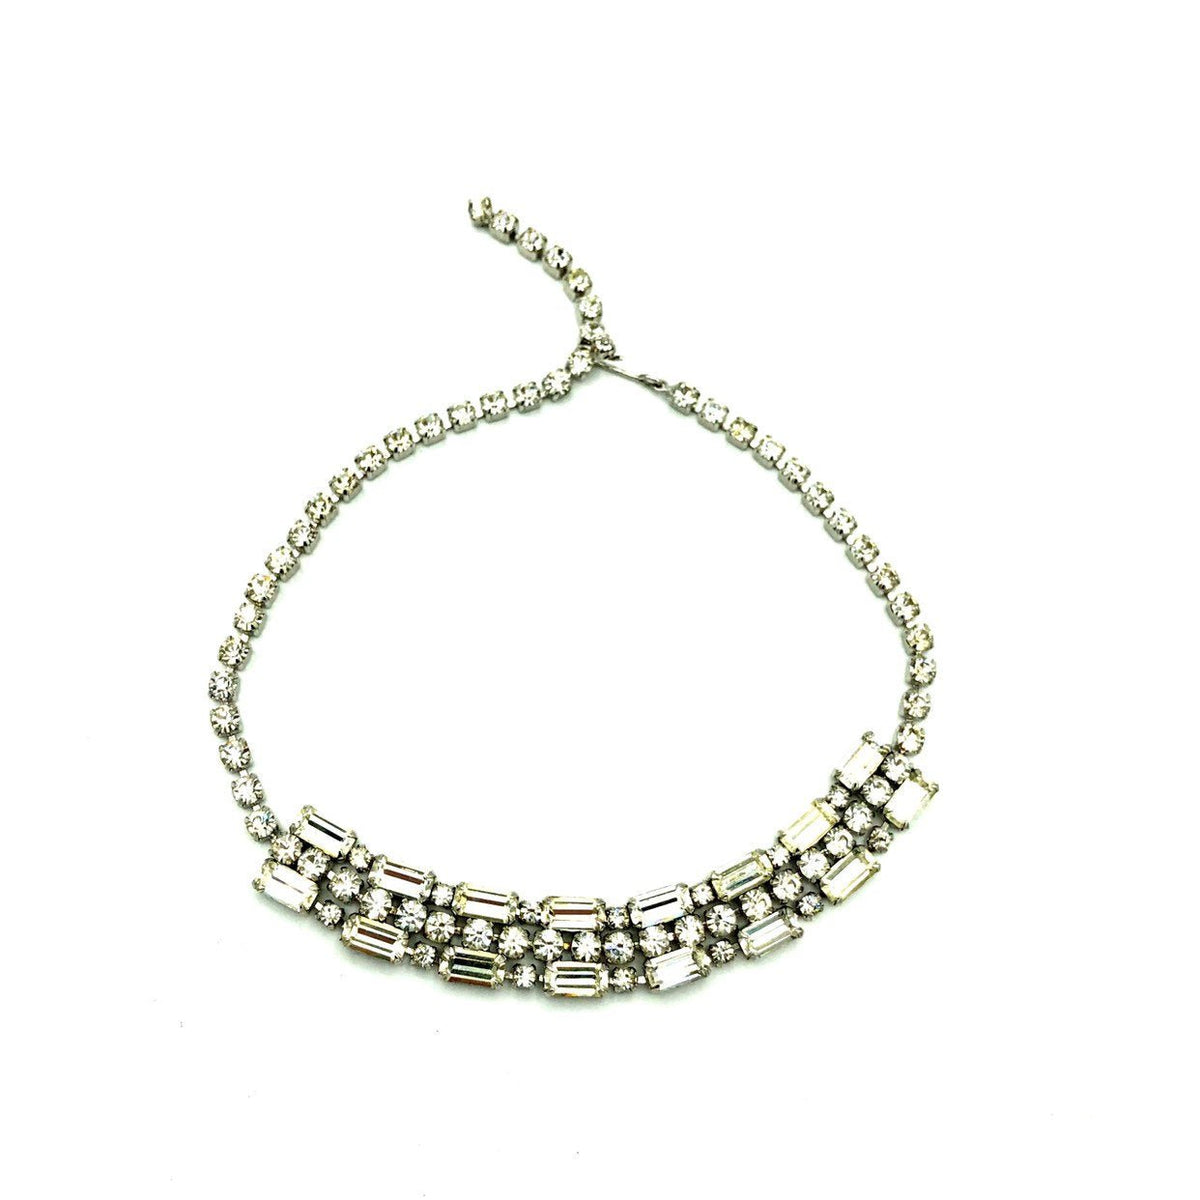 Vintage Silver Art Deco Style Diamante Collar Statement Necklace - 24 Wishes Vintage Jewelry